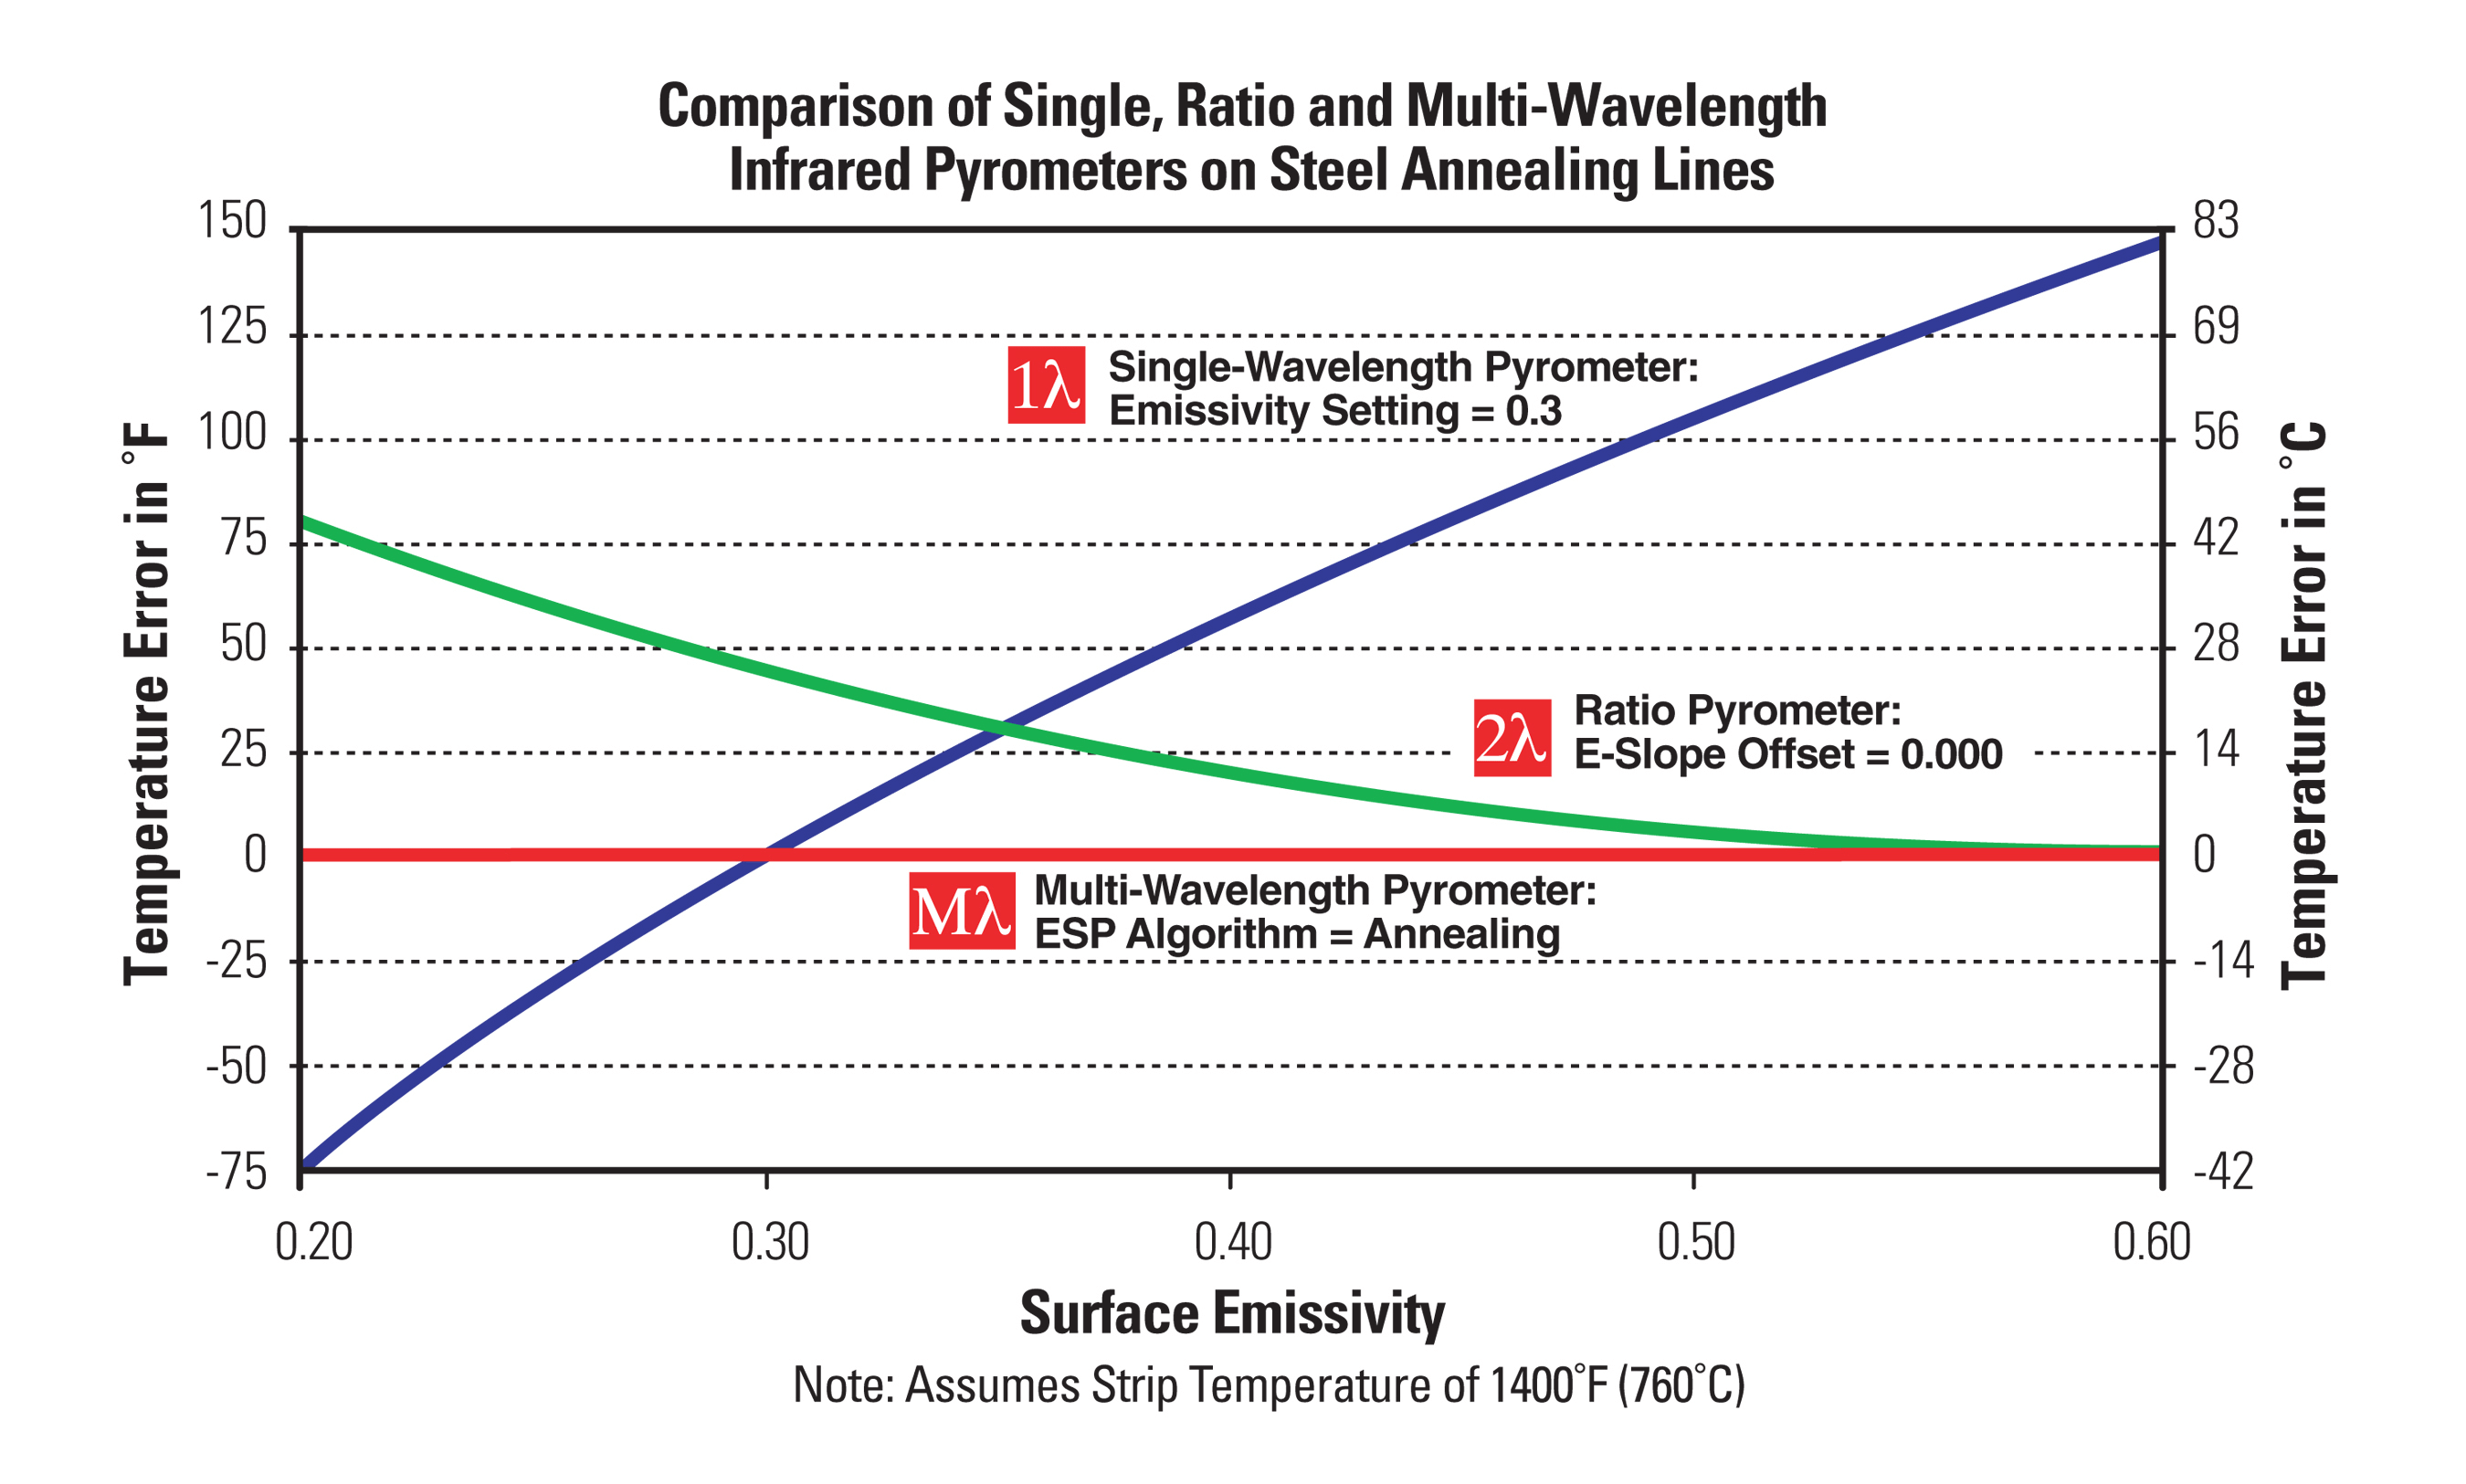 Chart comparing Single-Wavelength, Ratio, and Multi-Wavelength pyrometers on steel annealing lines.